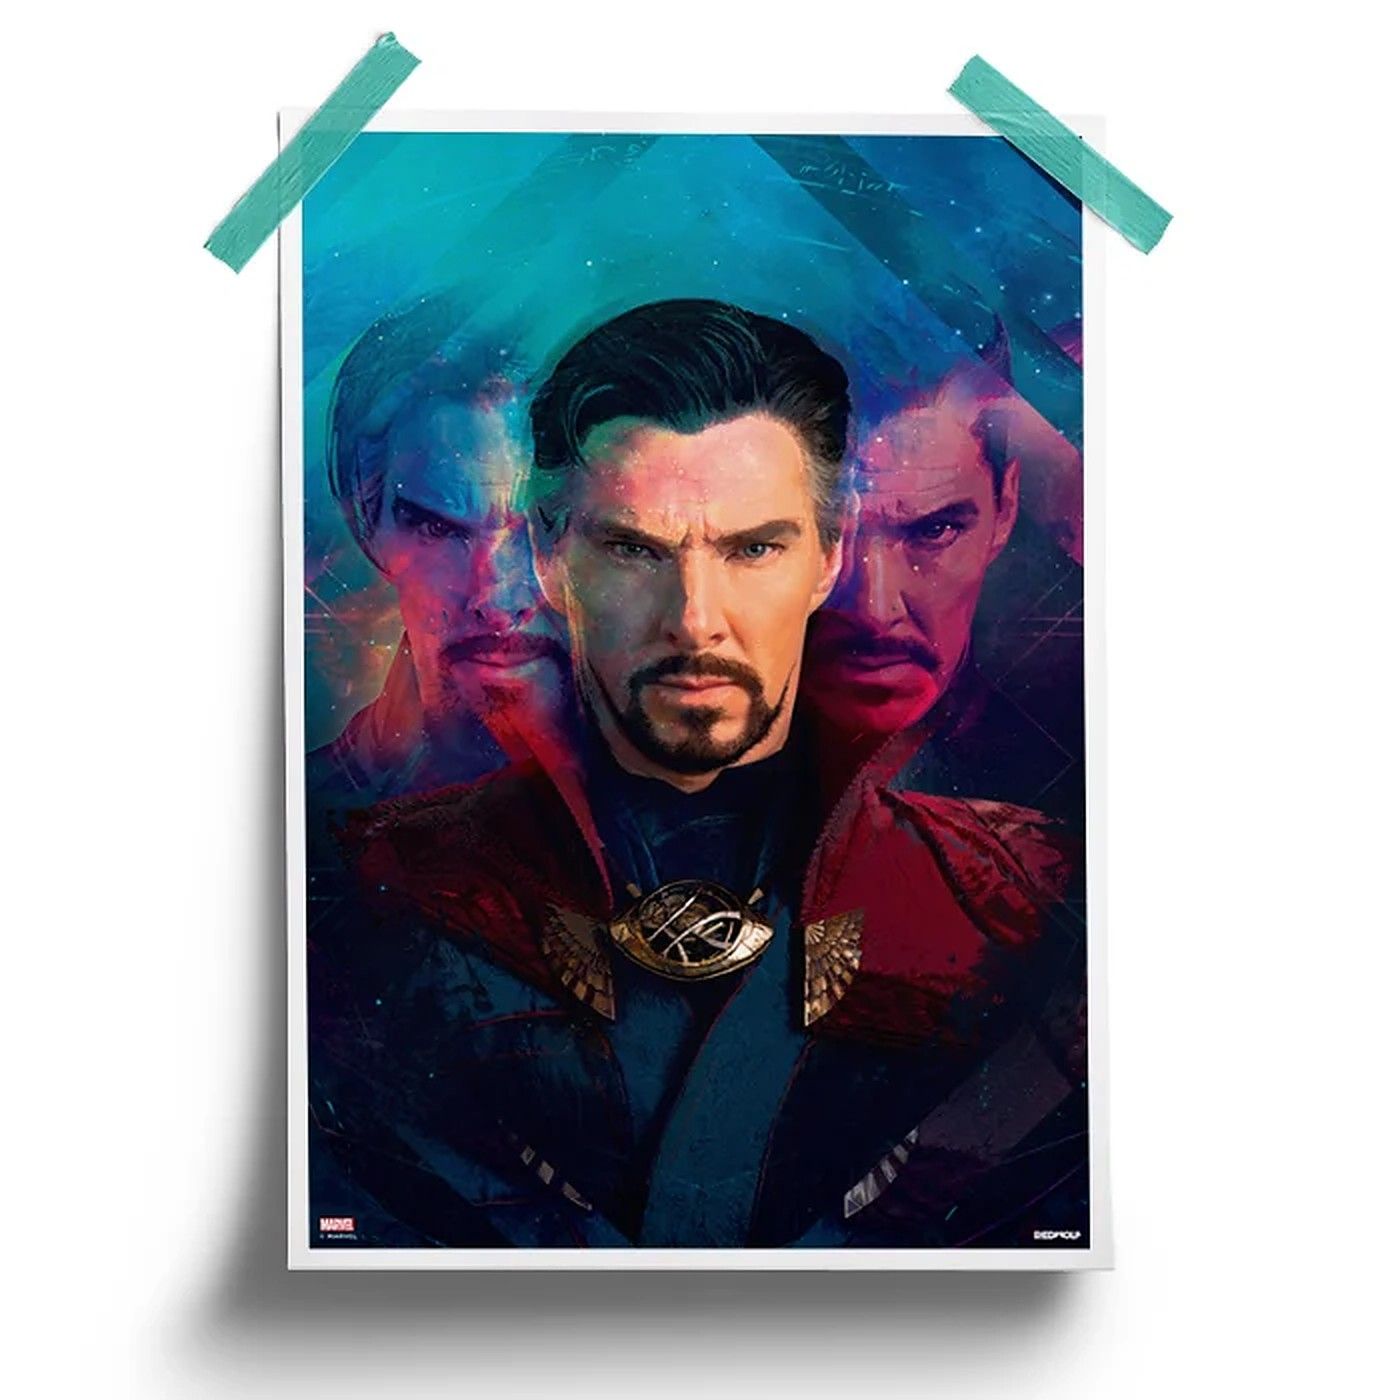 Doctor Strange 2 Art Gives New Look at the Hero’s Two Variants